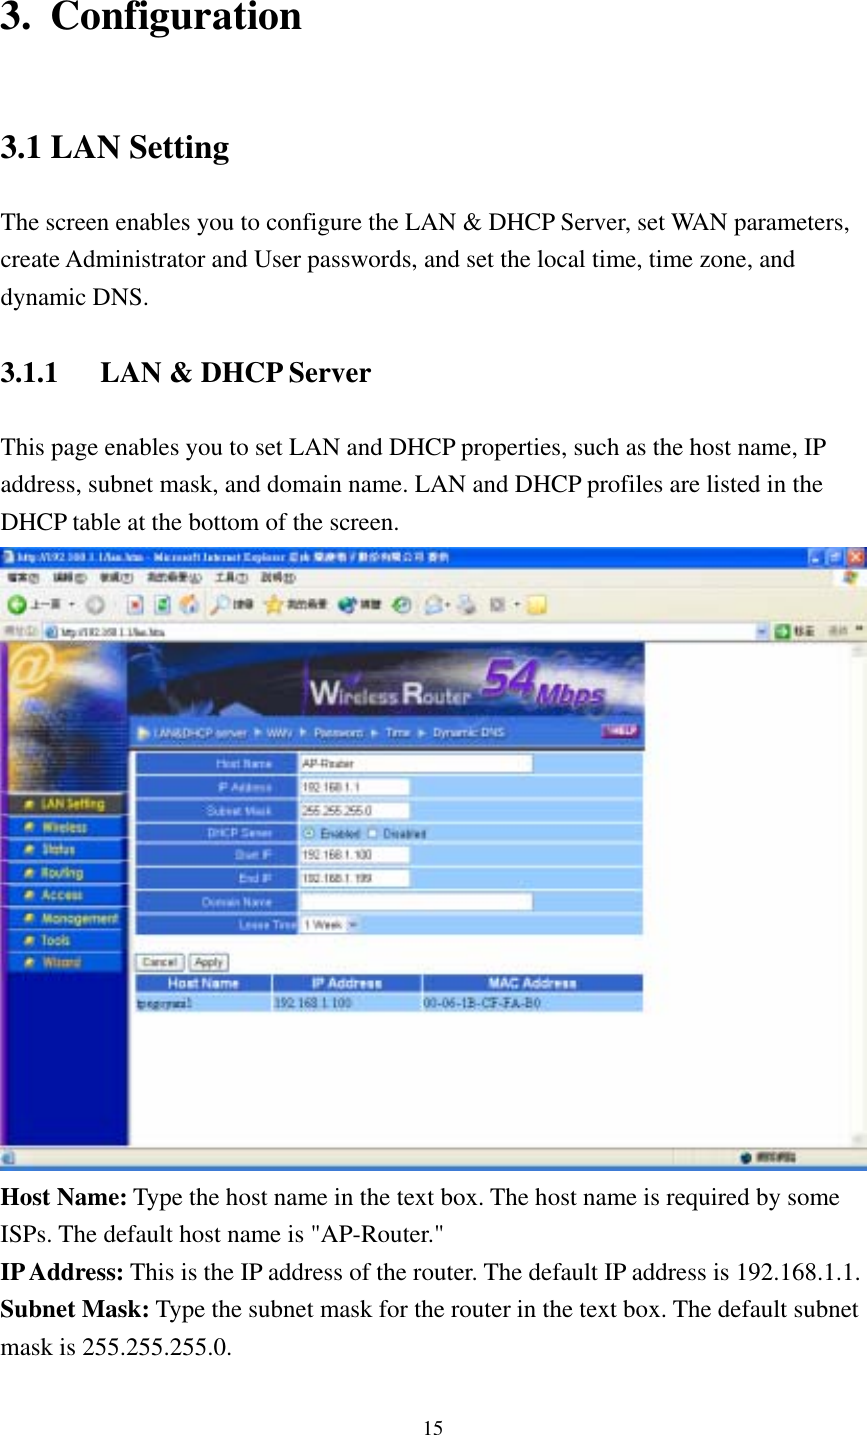  153. Configuration 3.1 LAN Setting The screen enables you to configure the LAN &amp; DHCP Server, set WAN parameters, create Administrator and User passwords, and set the local time, time zone, and dynamic DNS. 3.1.1  LAN &amp; DHCP Server This page enables you to set LAN and DHCP properties, such as the host name, IP address, subnet mask, and domain name. LAN and DHCP profiles are listed in the DHCP table at the bottom of the screen.  Host Name: Type the host name in the text box. The host name is required by some ISPs. The default host name is &quot;AP-Router.&quot; IP Address: This is the IP address of the router. The default IP address is 192.168.1.1. Subnet Mask: Type the subnet mask for the router in the text box. The default subnet mask is 255.255.255.0. 